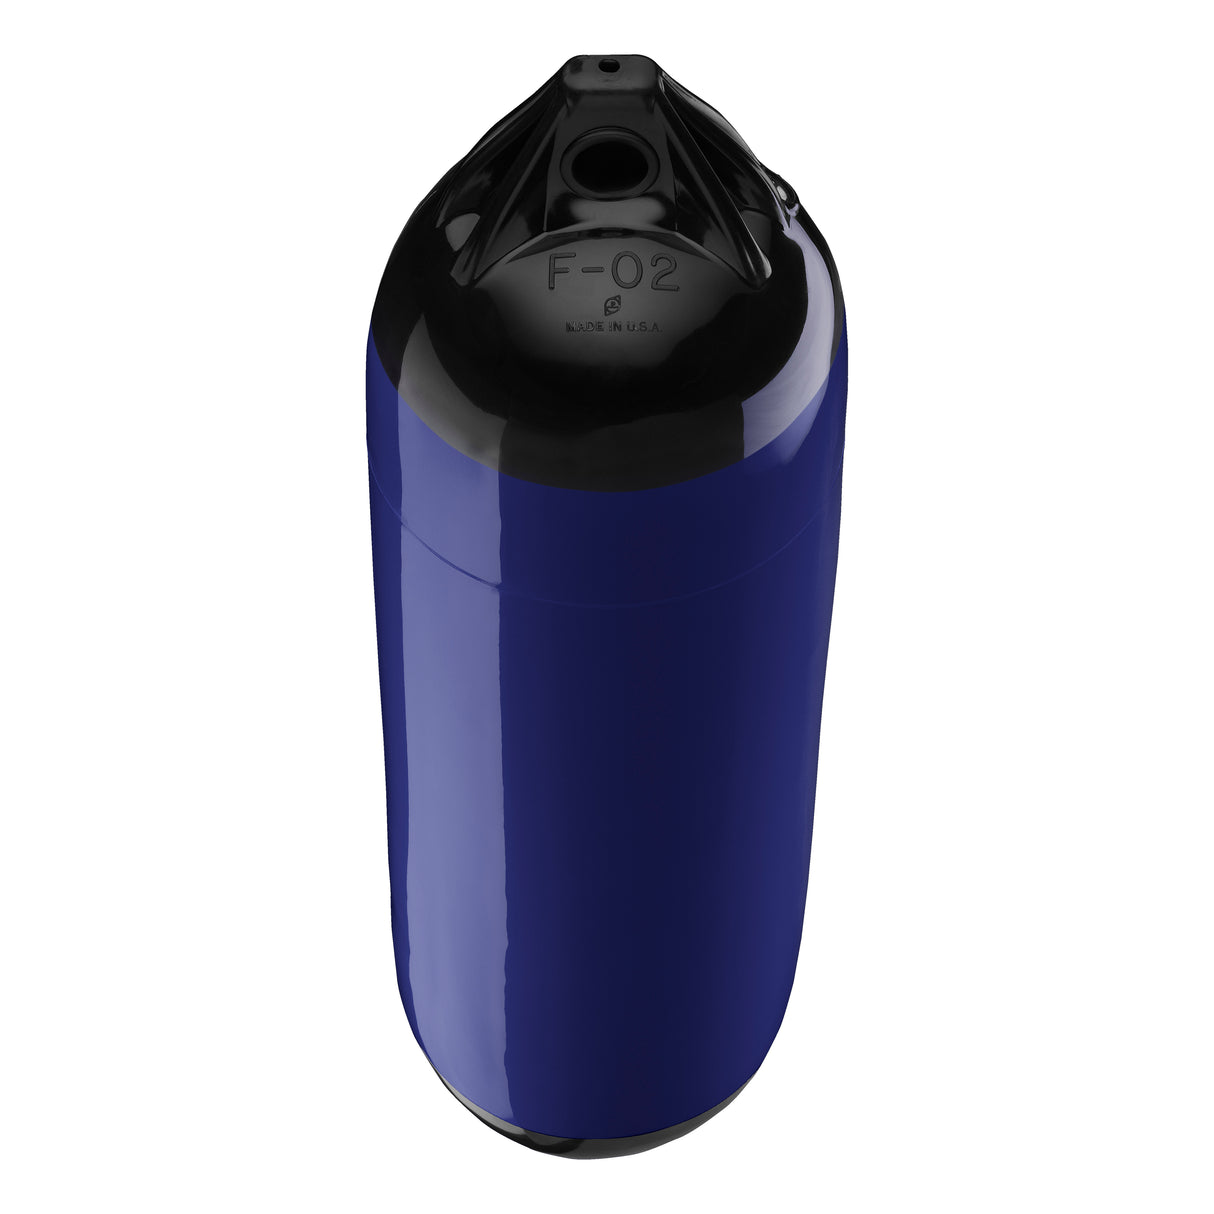 Navy Blue boat fender with Black-Top, Polyform F-02 angled shot